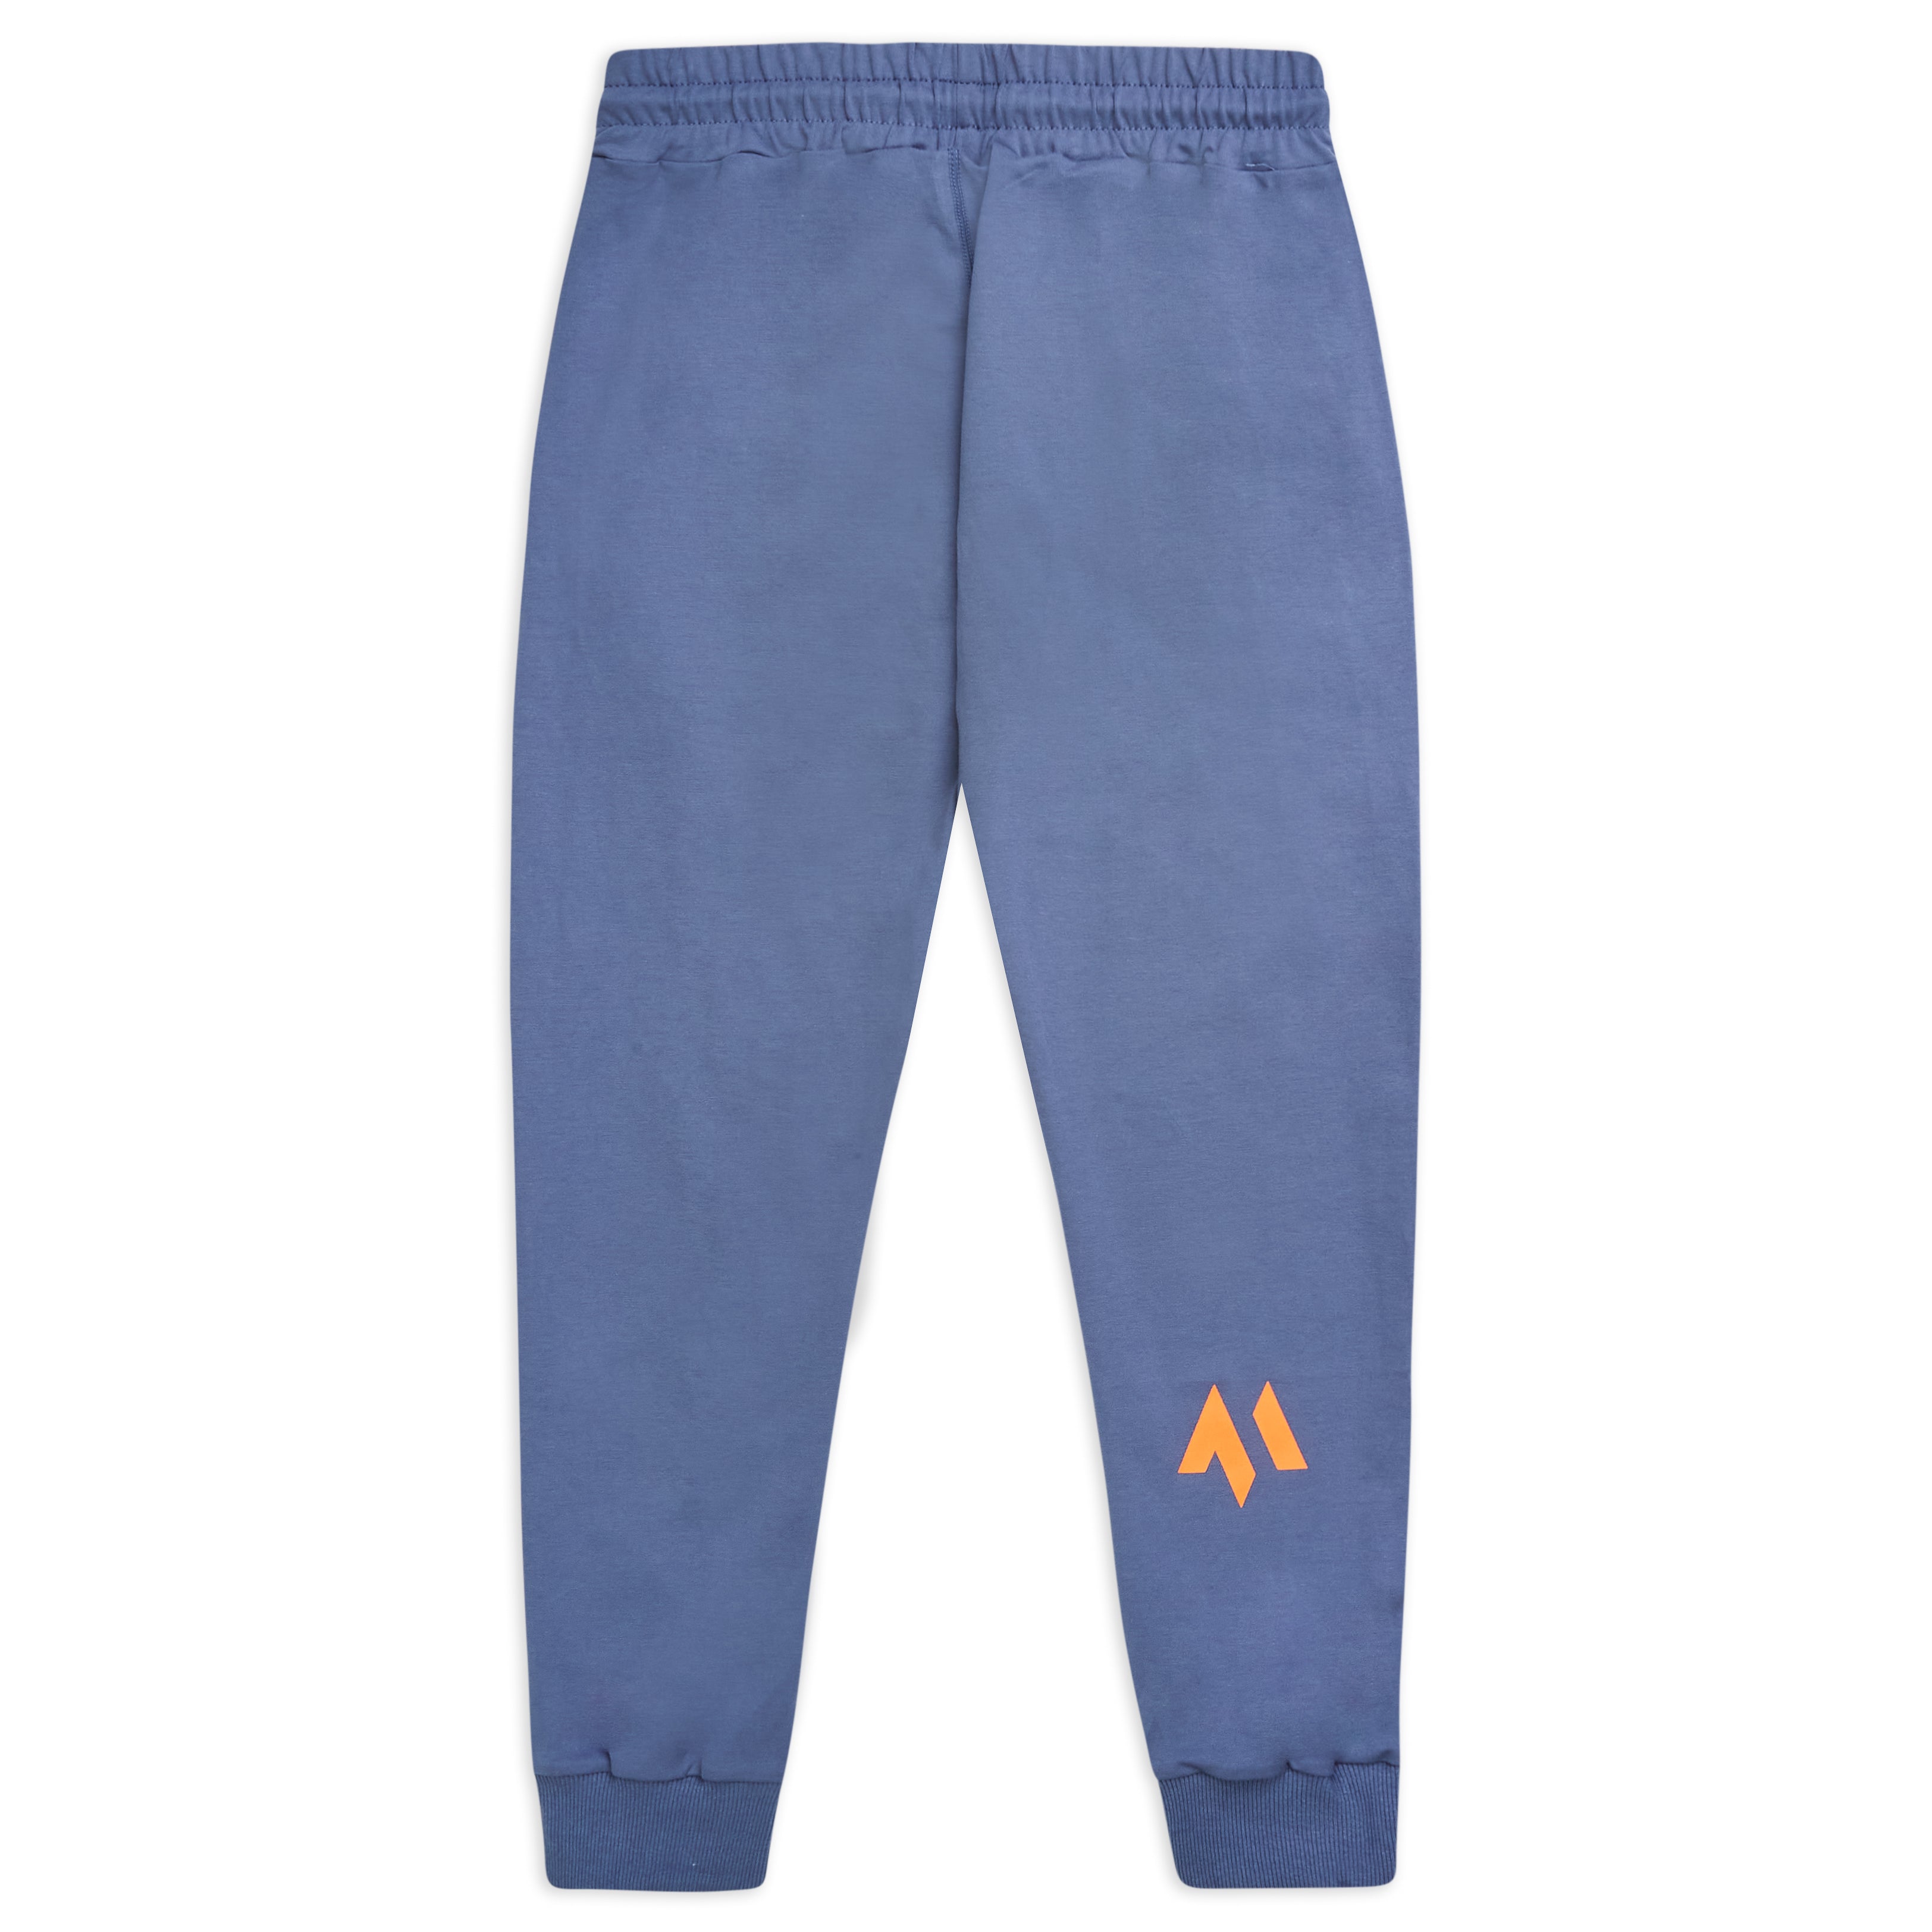 This is a rear product view of the new standard joggers in blue steel showing off the orange emblem on the right calf